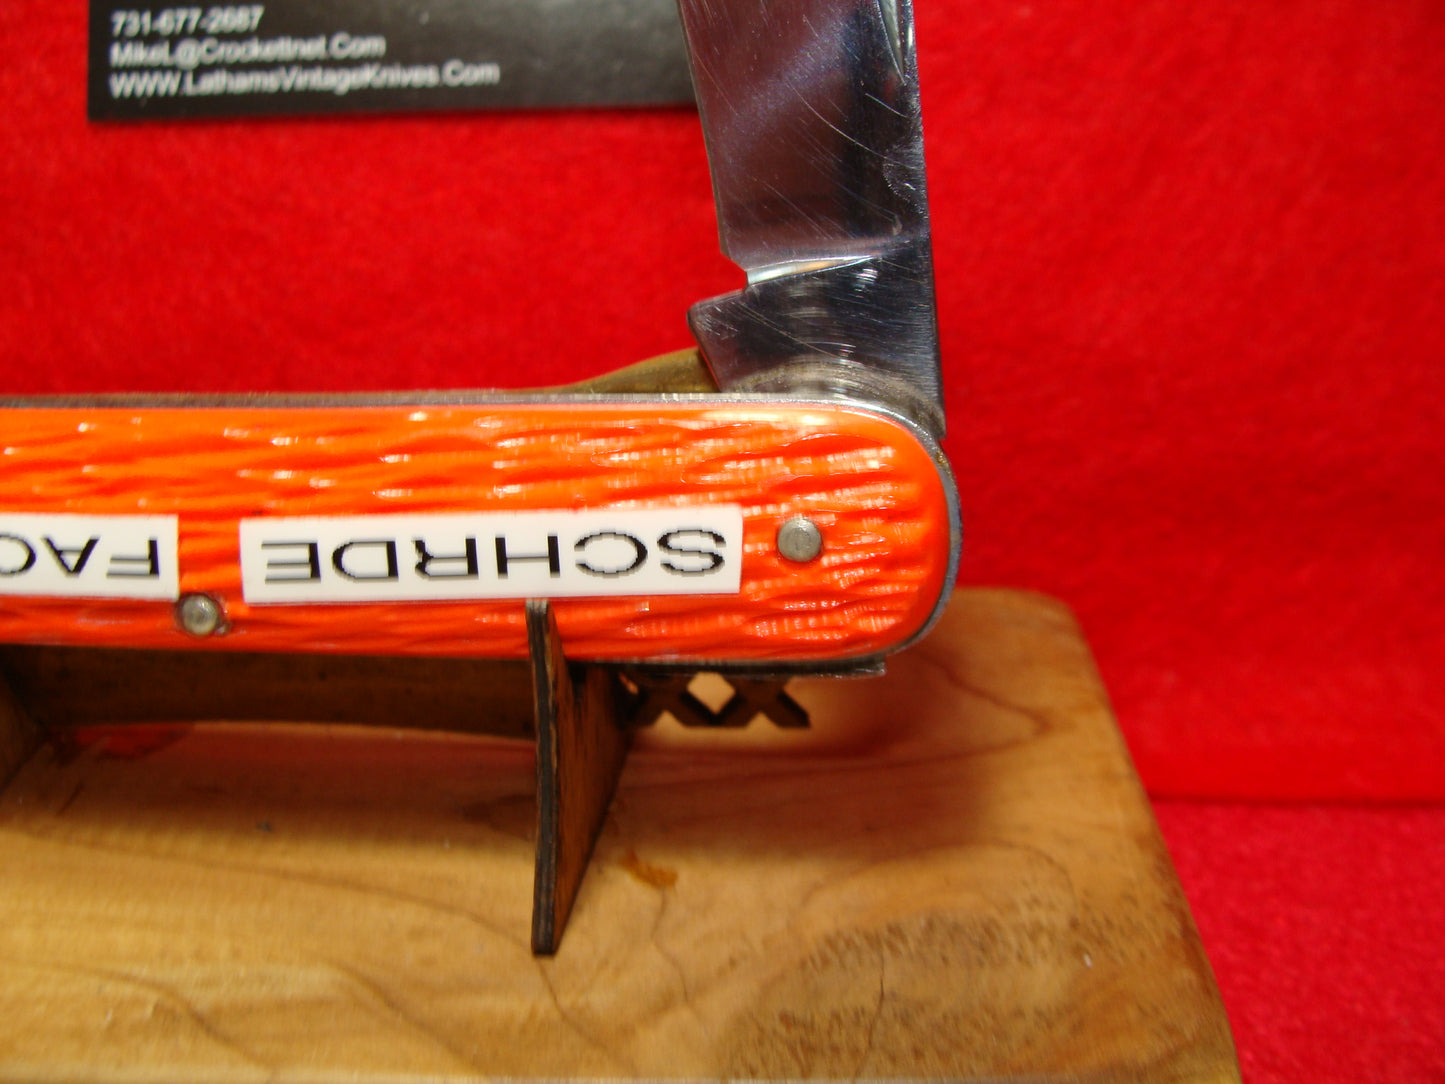 SCHRADE WALDEN NY 1946-76 PROTOTYPE CLIP FOLDING BLADE LINER LOCK PARACHUTE NON AUTOMATIC KNIFE ORANGE DELRIN PART OF THE SCHRADE FACTORY COLLECTION